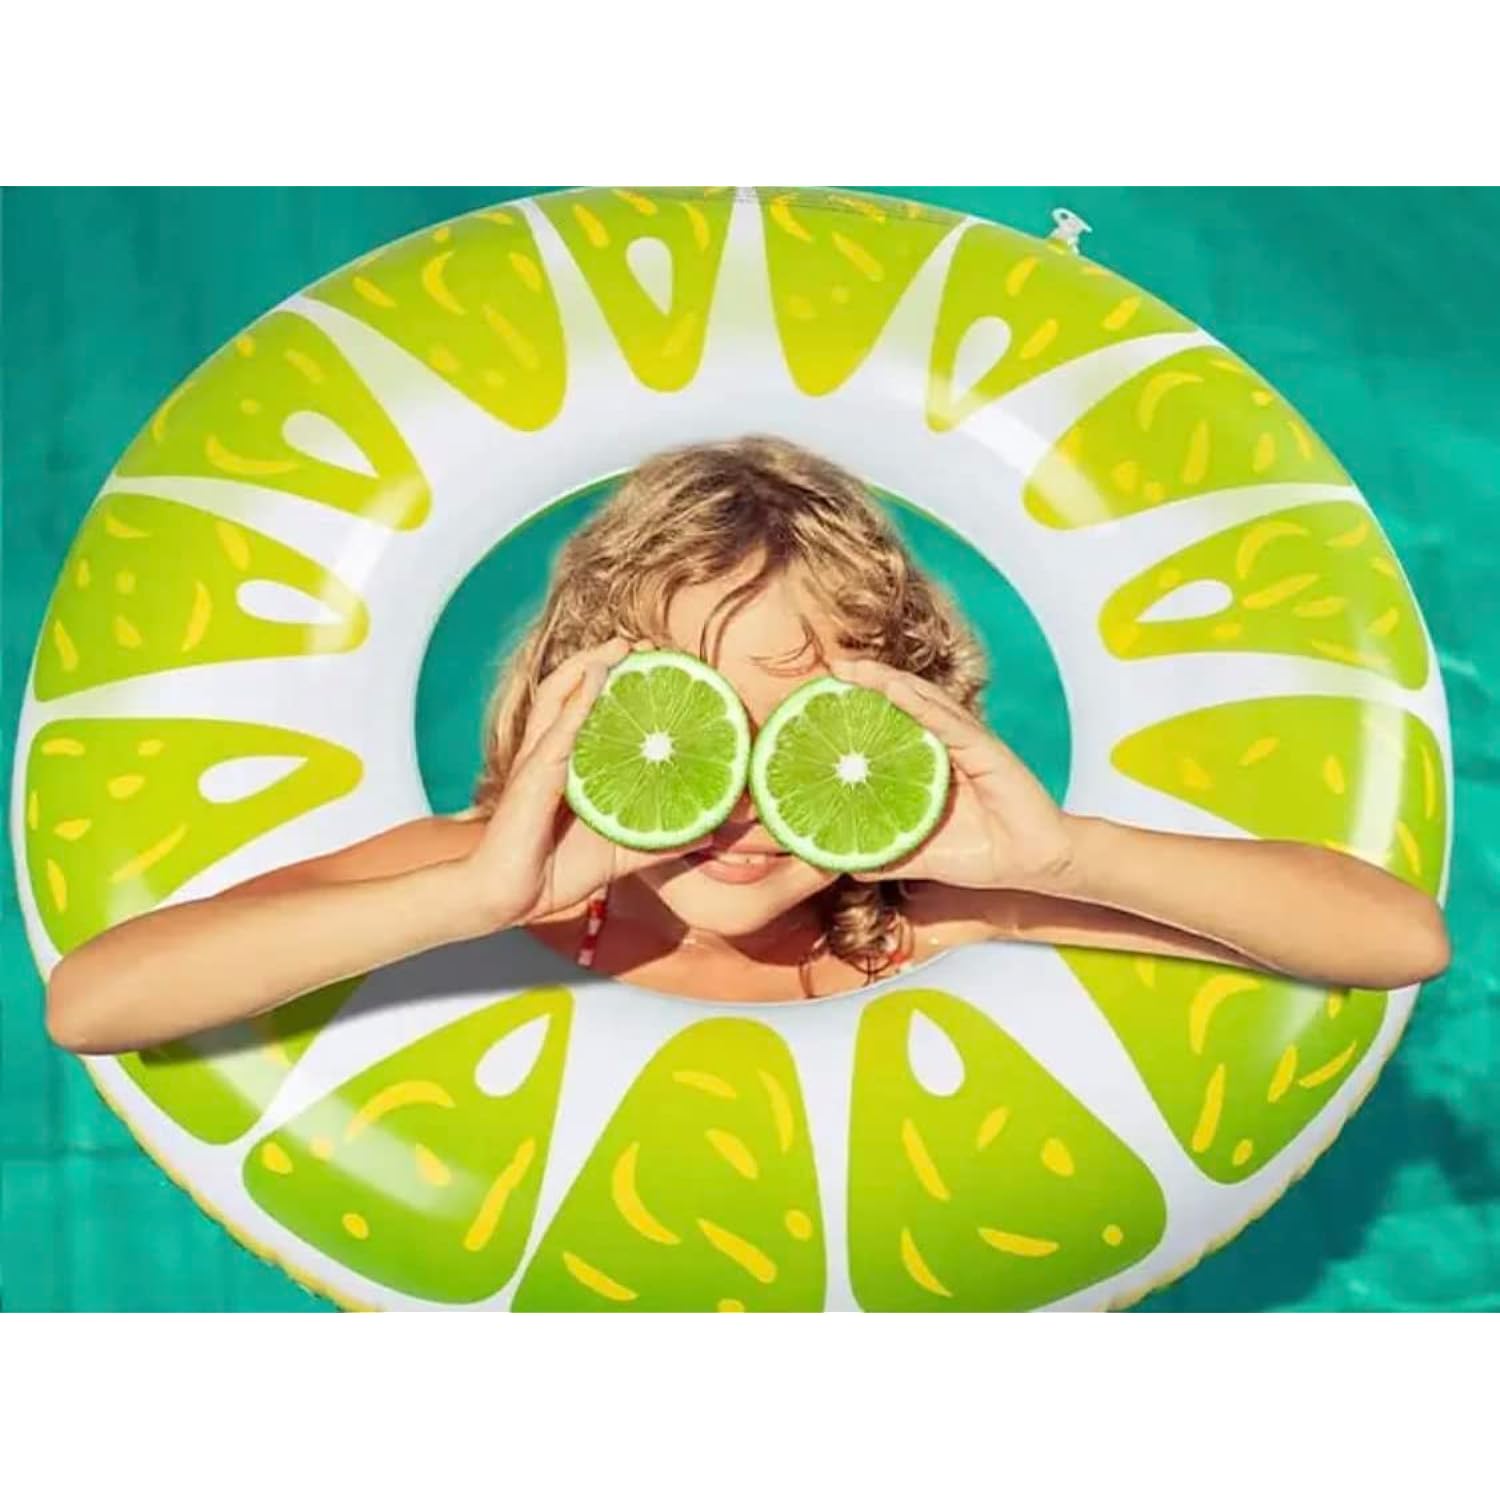 Great Choice Products Lime Pool Float (Green Lemon Pool Float) Perfect With A Margarita In Margaritaville